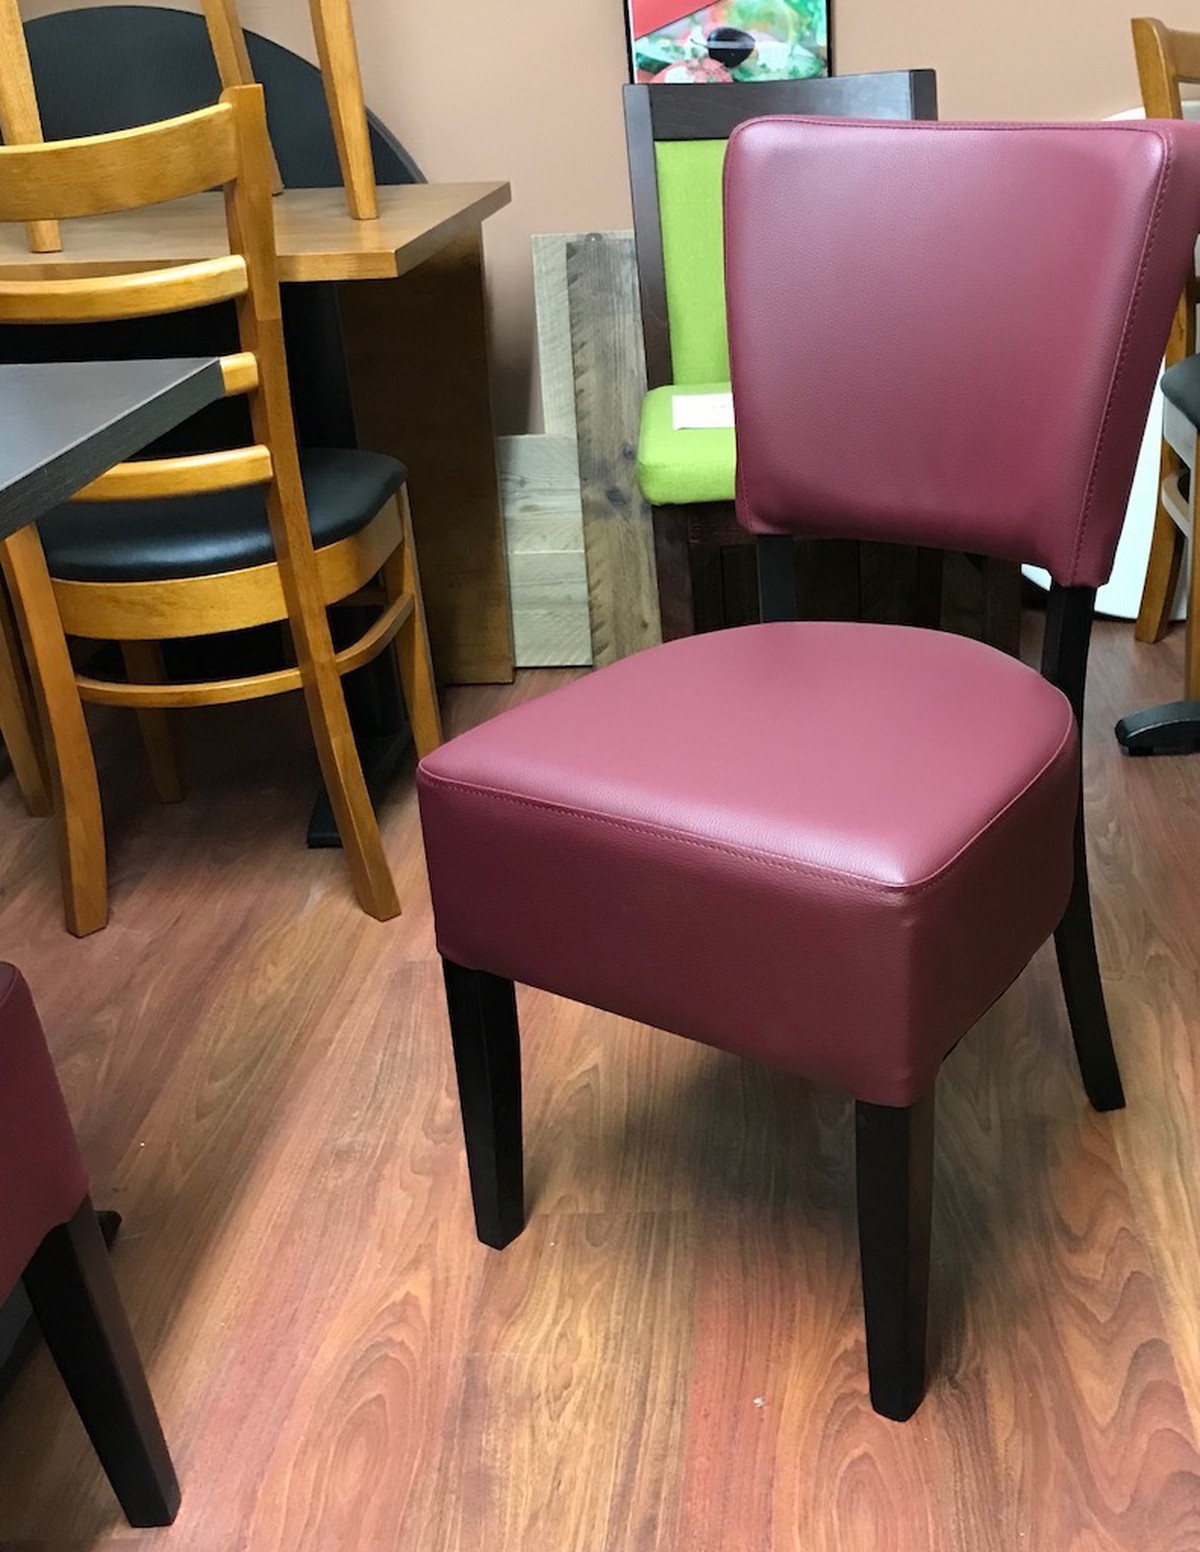 Secondhand Chairs and Tables | Restaurant Chairs | New Restaurant